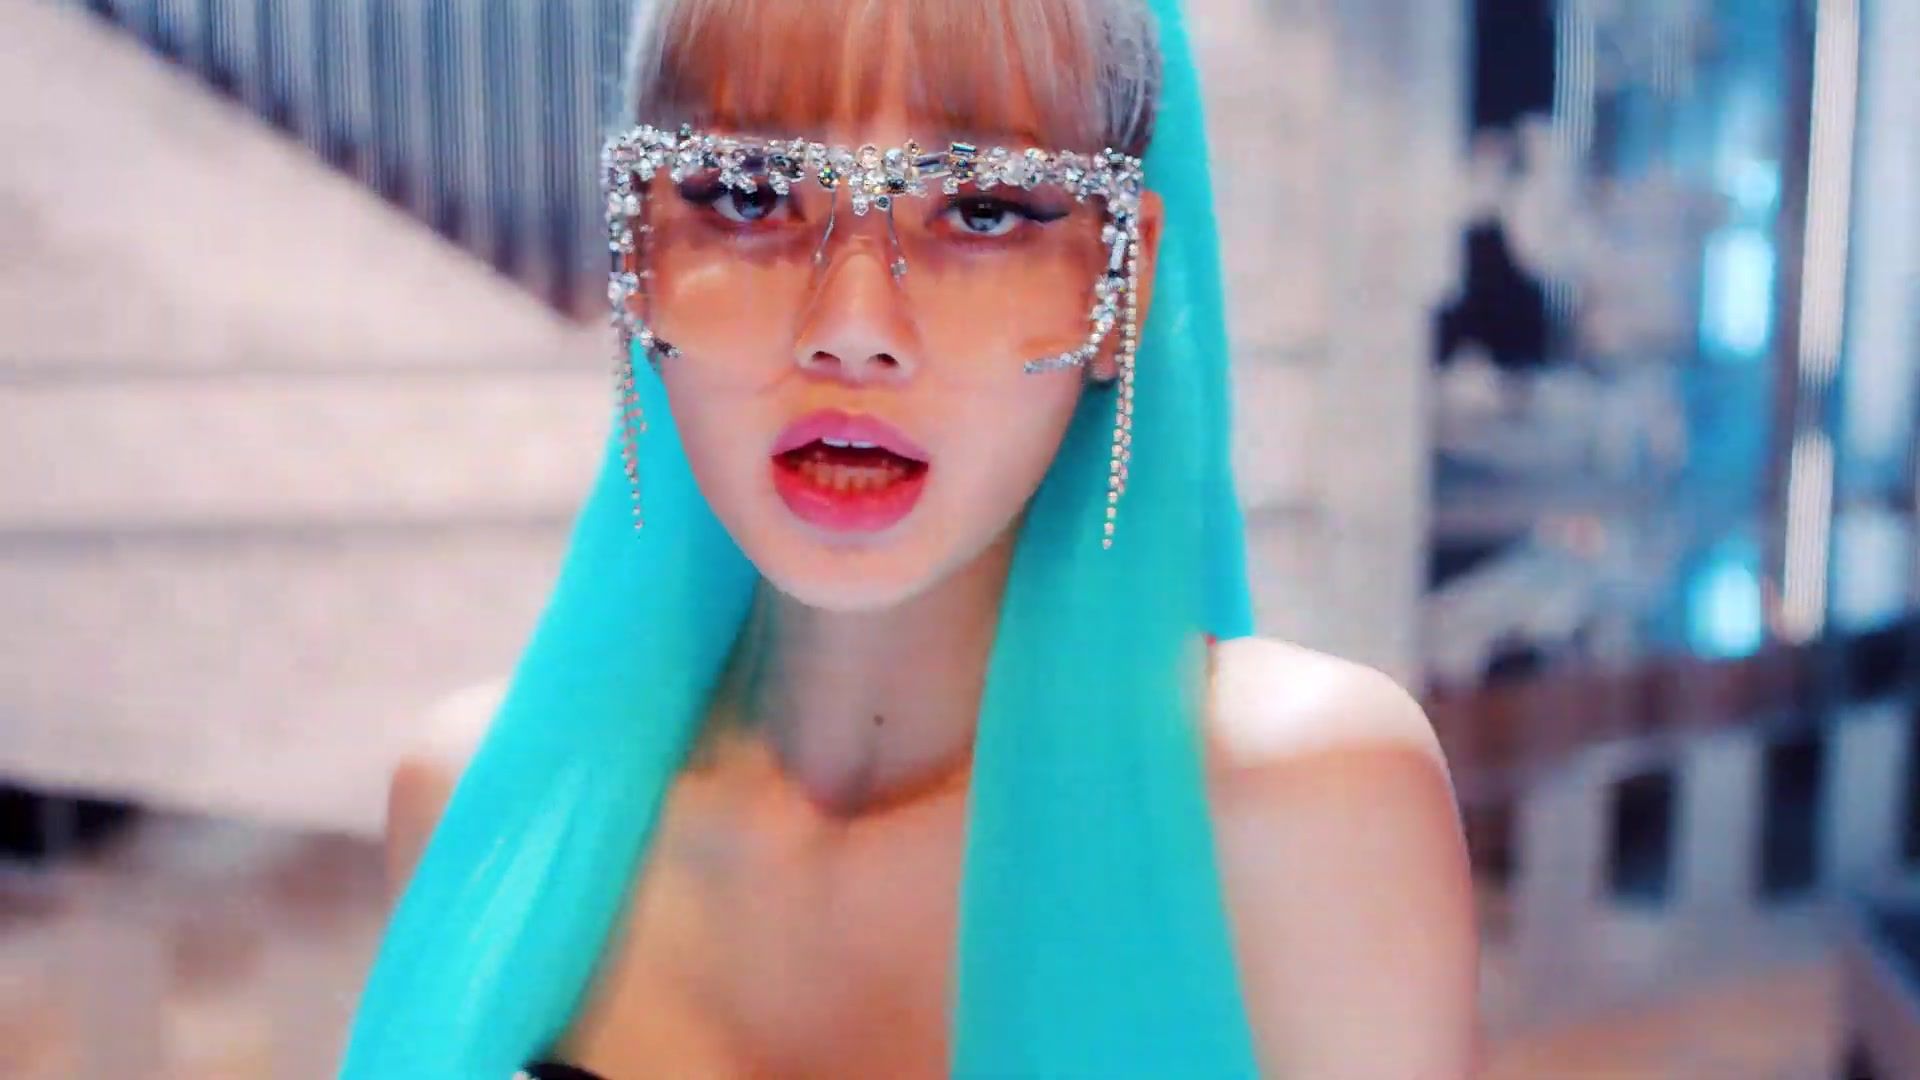 Embellished Glasses Worn by Lisa in “Kill This Love” Music Video